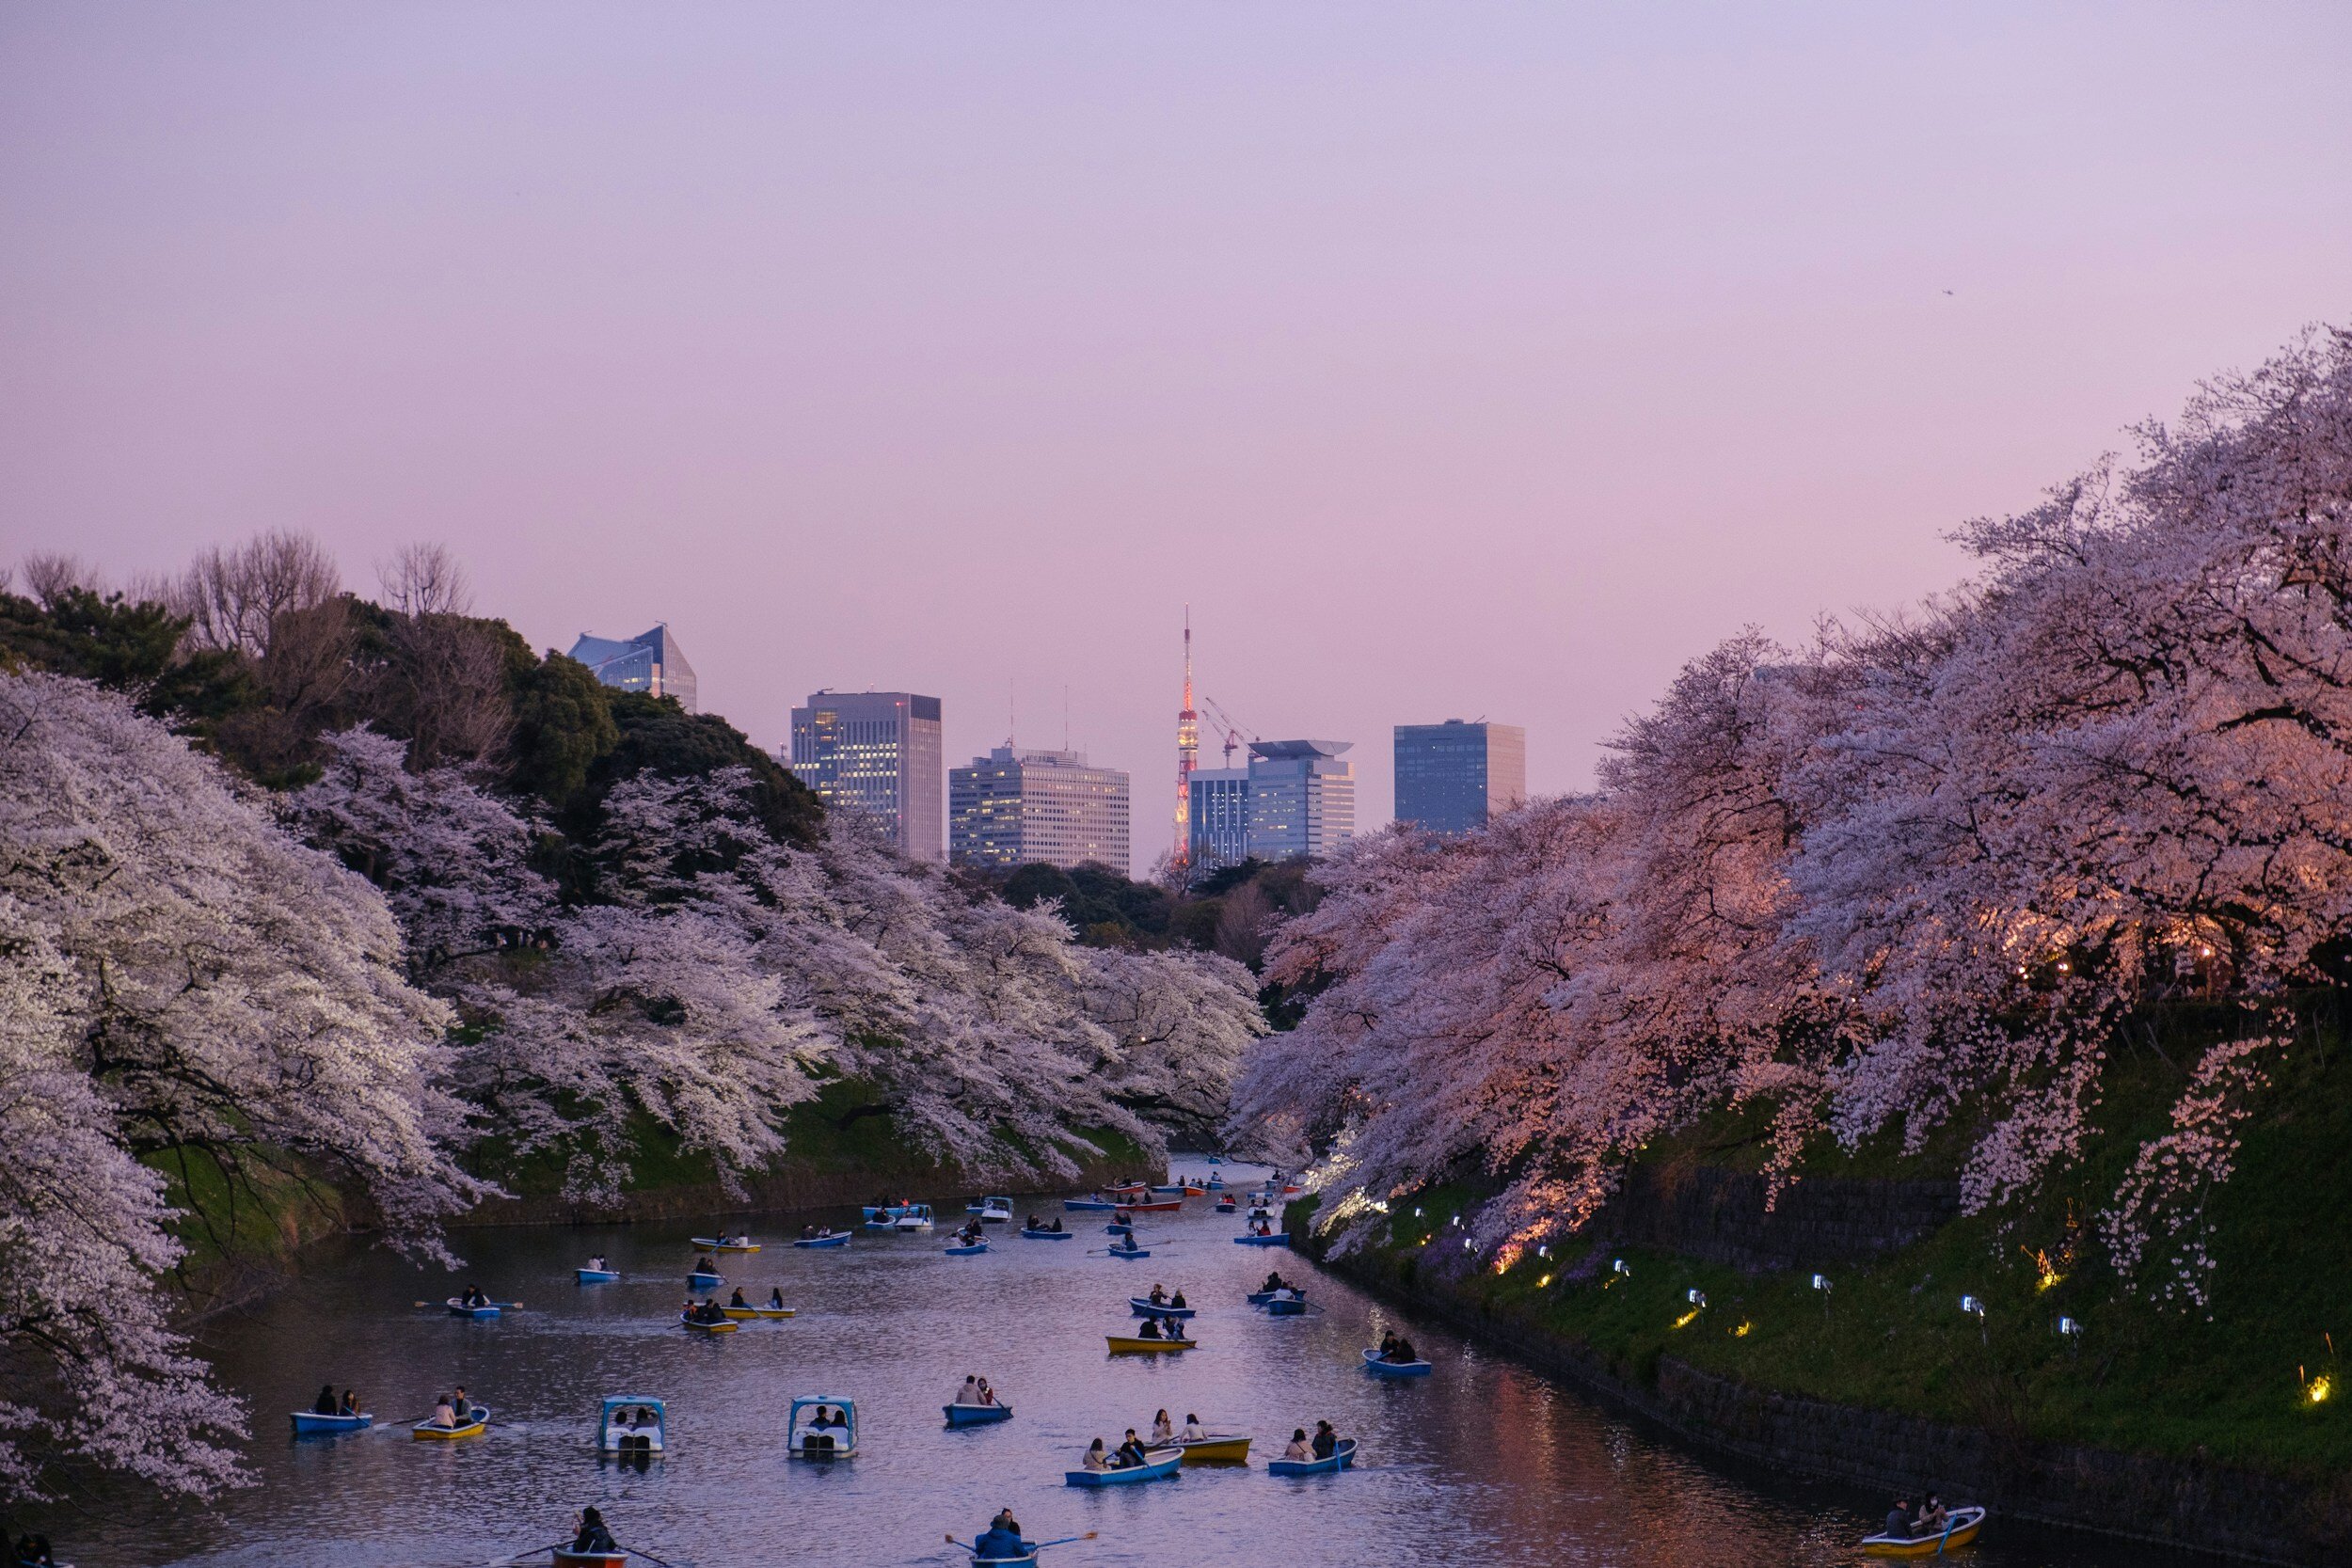 a lake surrounded by blossom trees with boats on the lake, sky is pink at dusk